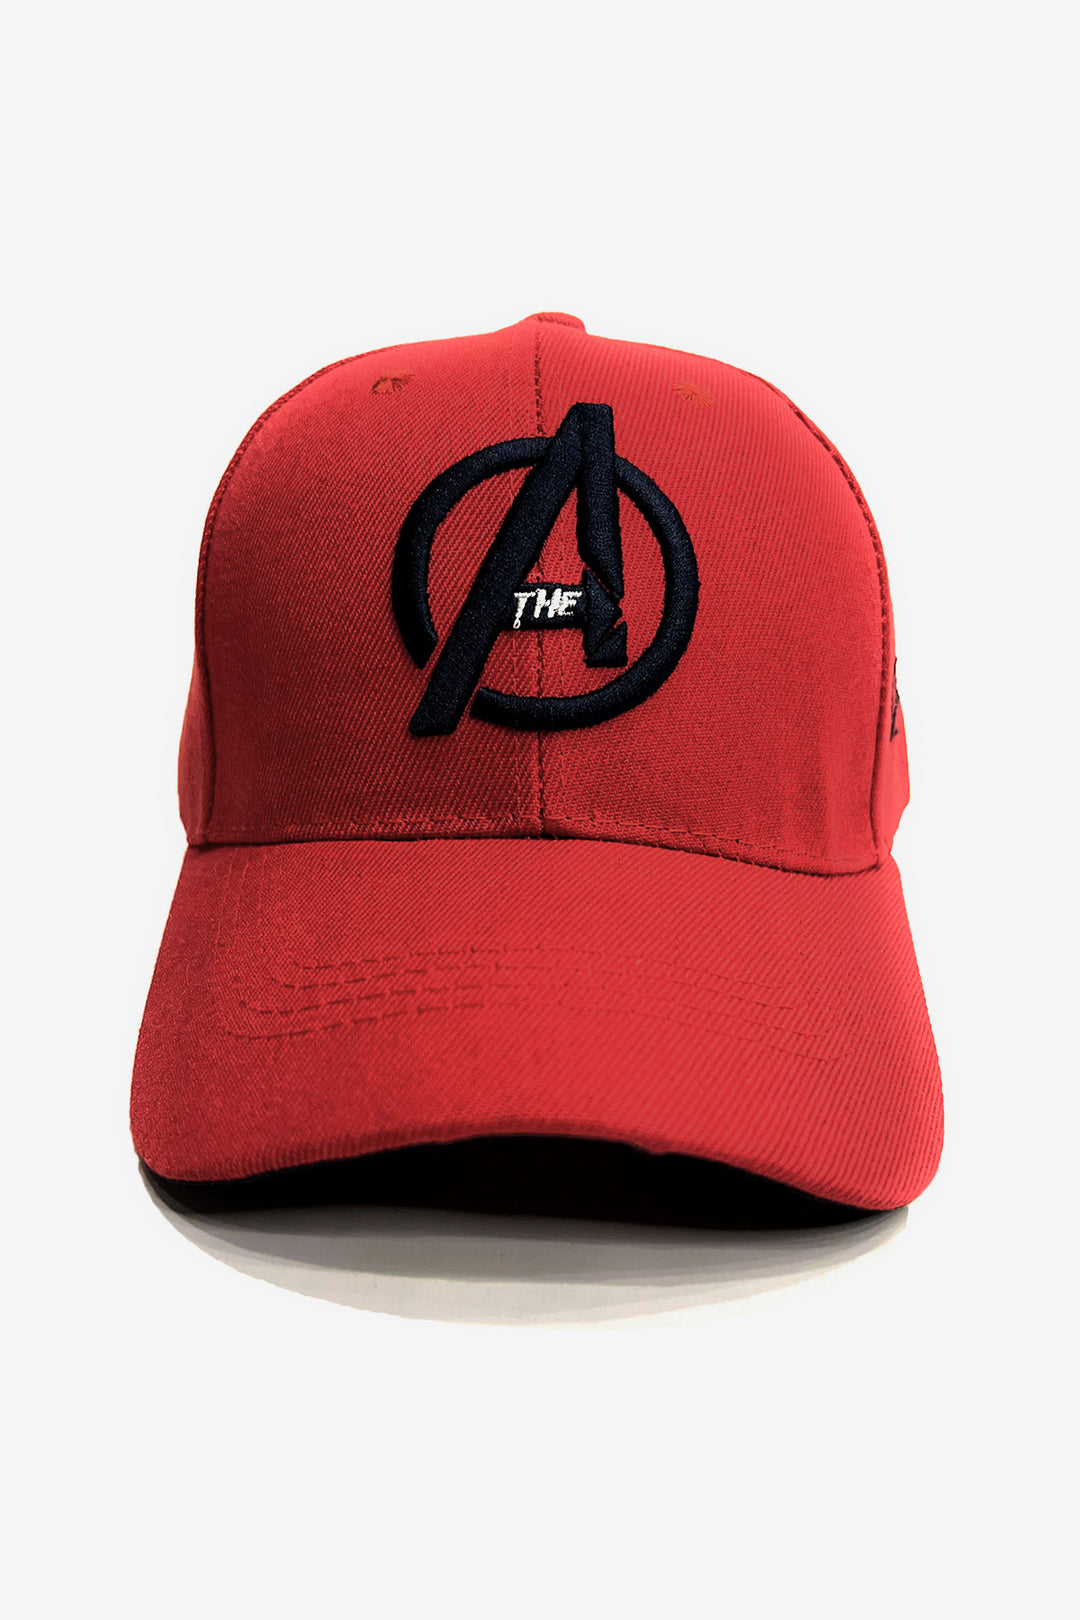 Red Avengers Embroidered Cap - S23 - MCP098R